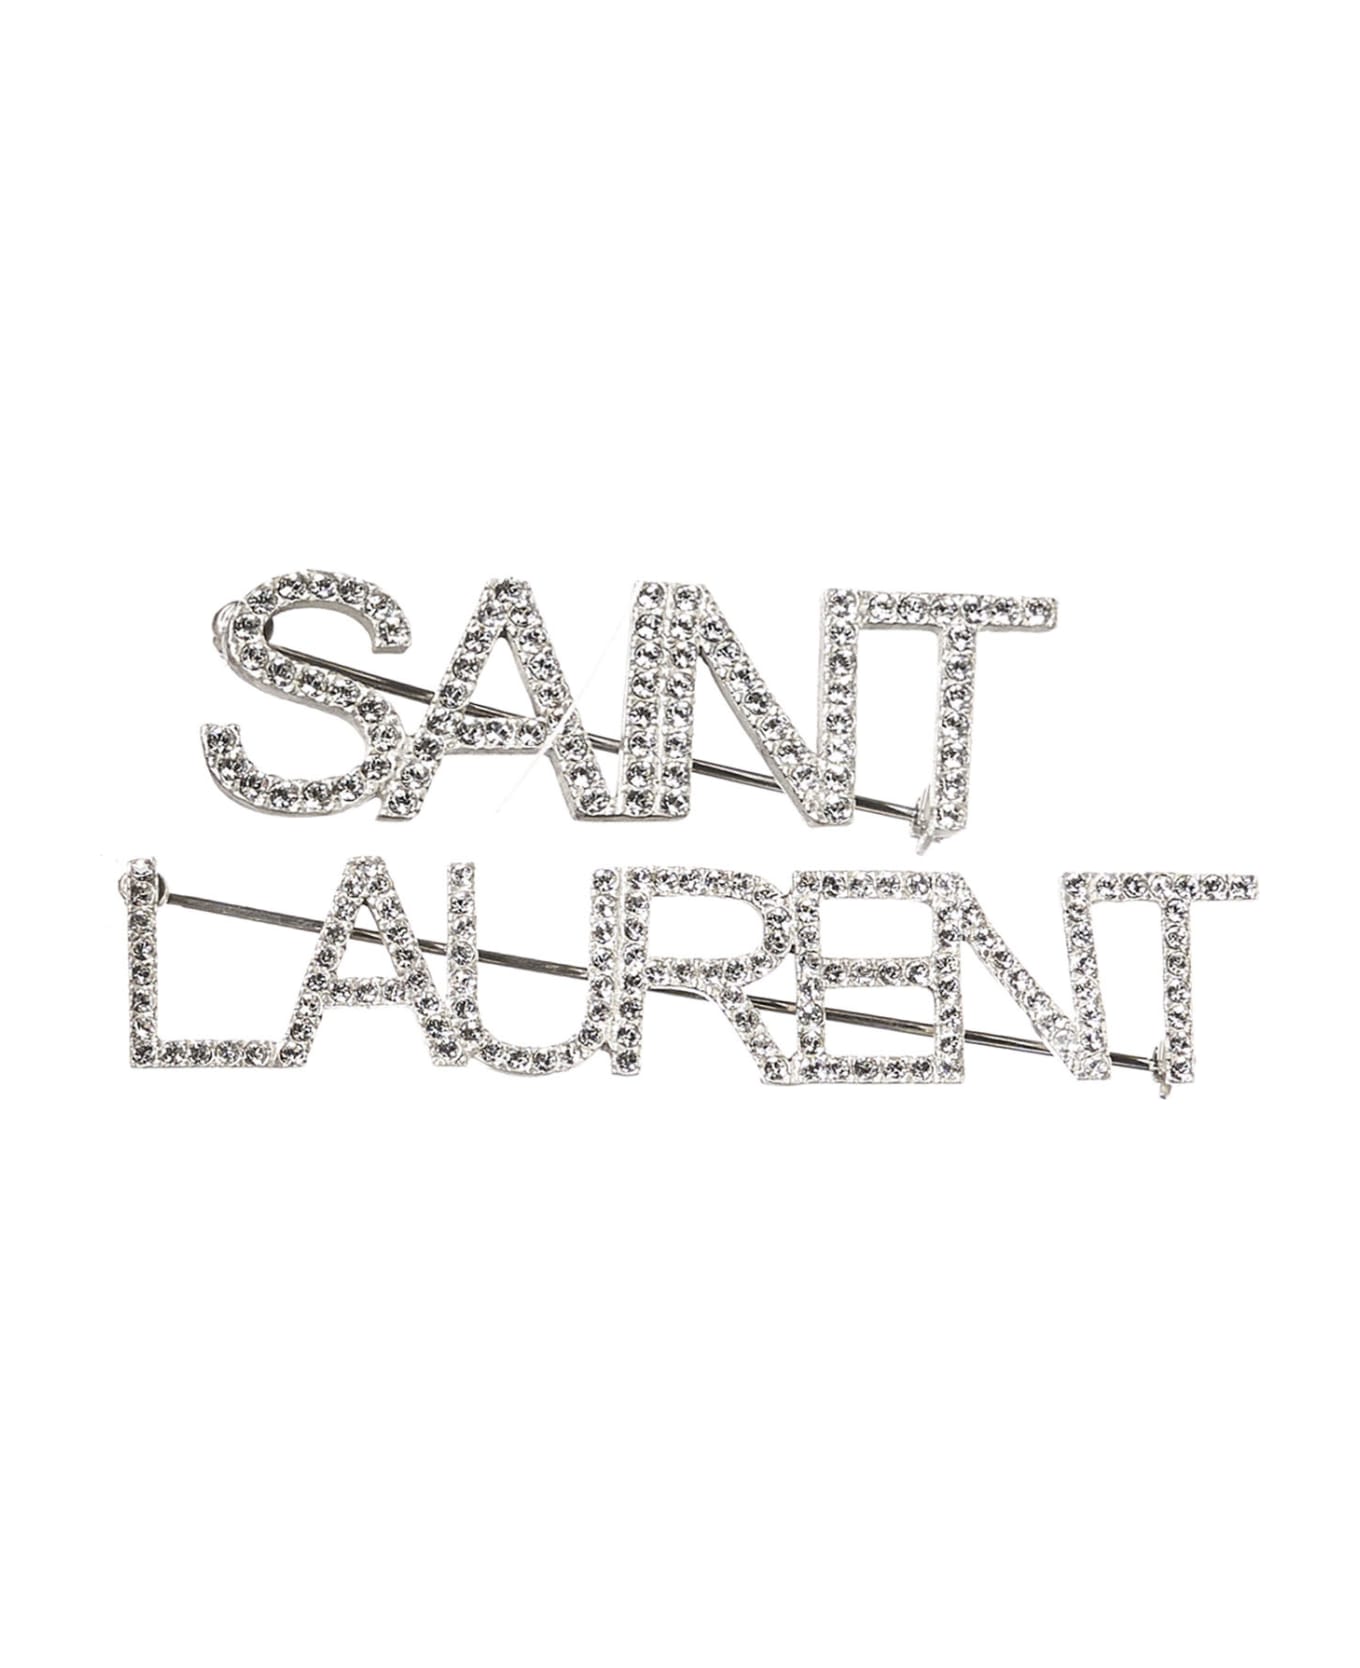 Saint Laurent Brooches - Silver